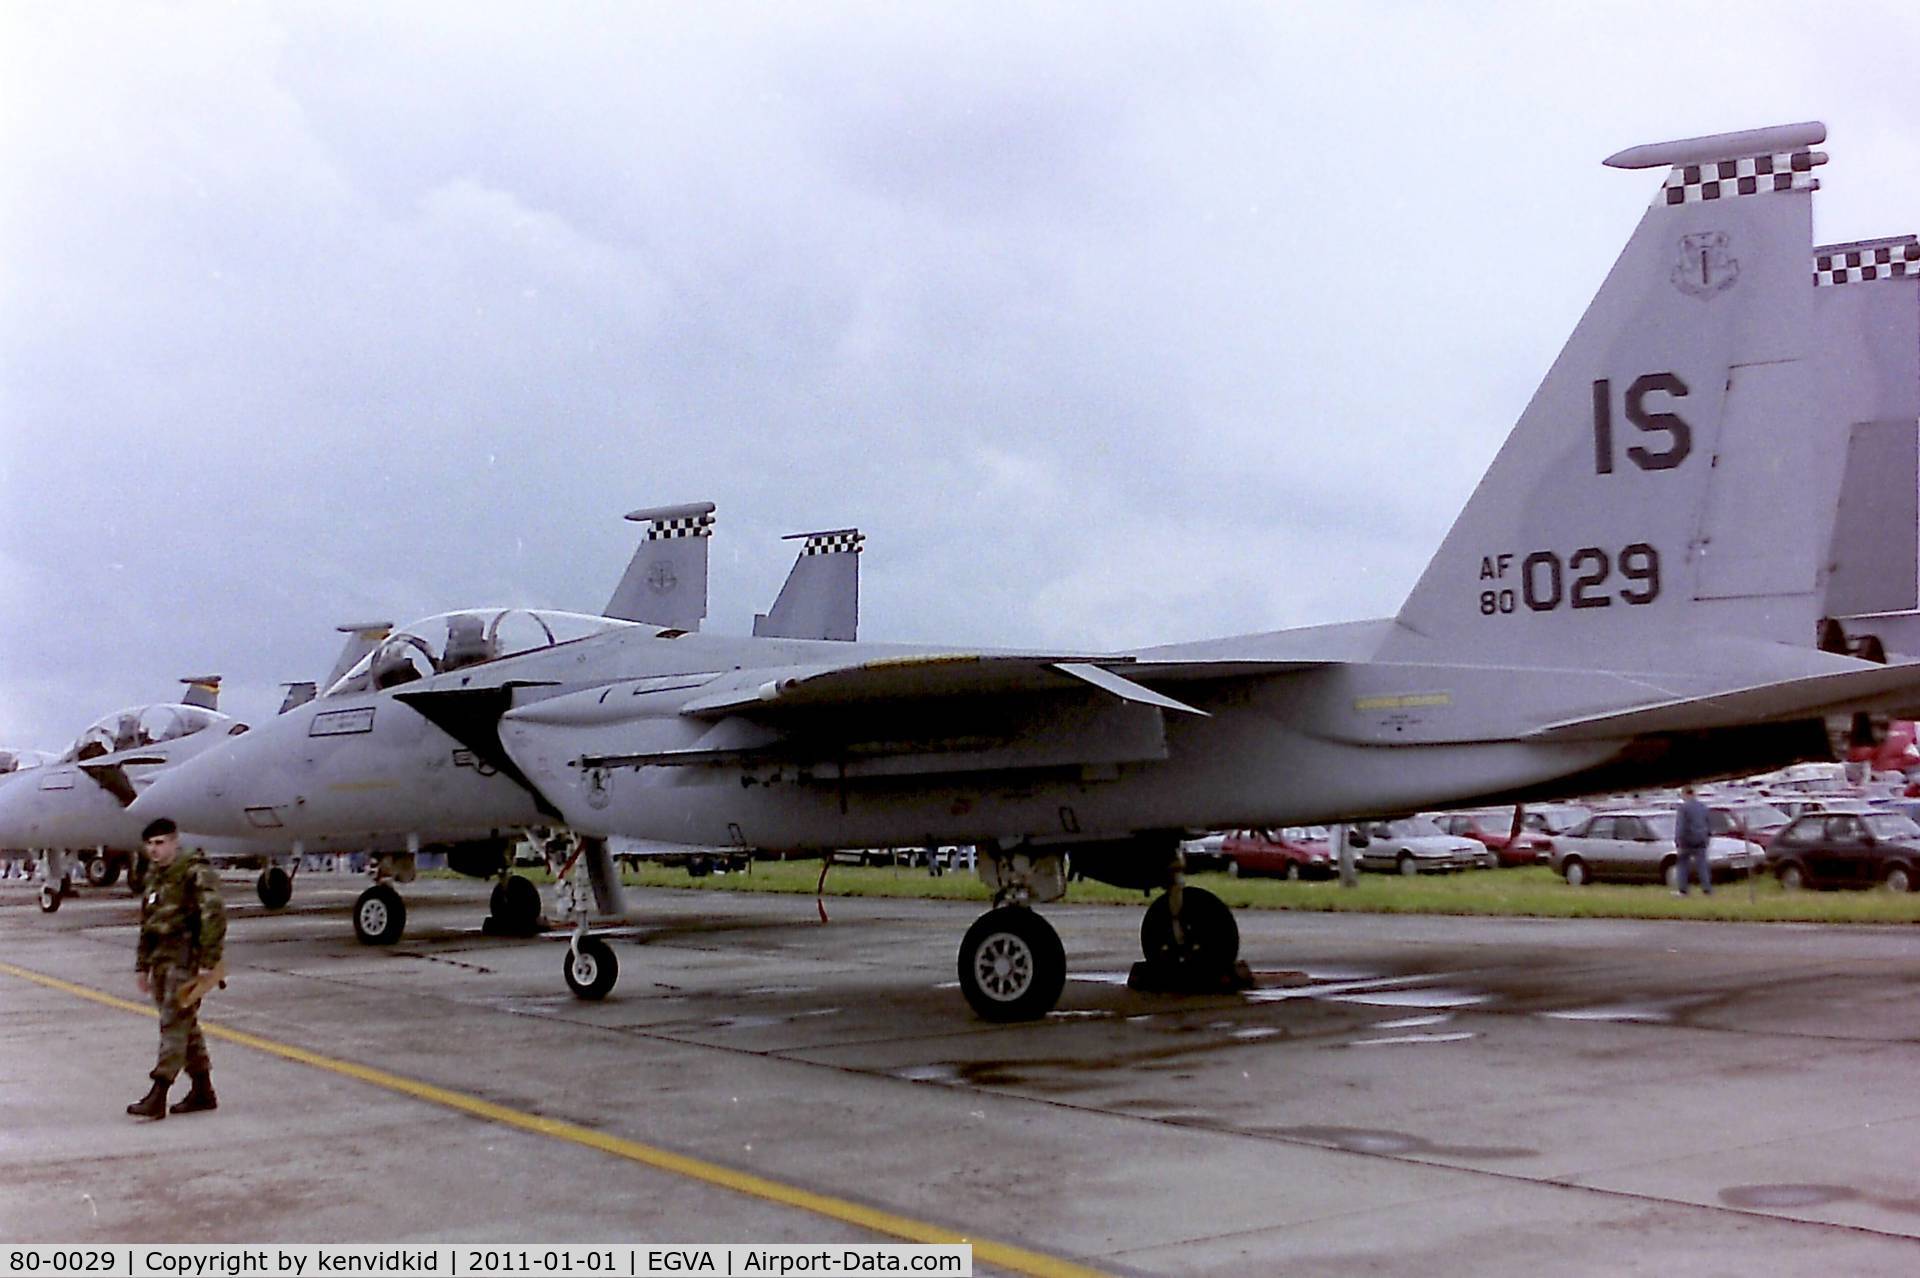 80-0029, 1980 McDonnell Douglas F-15C Eagle C/N 0679/C178, At RIAT 1993, scanned from negative.